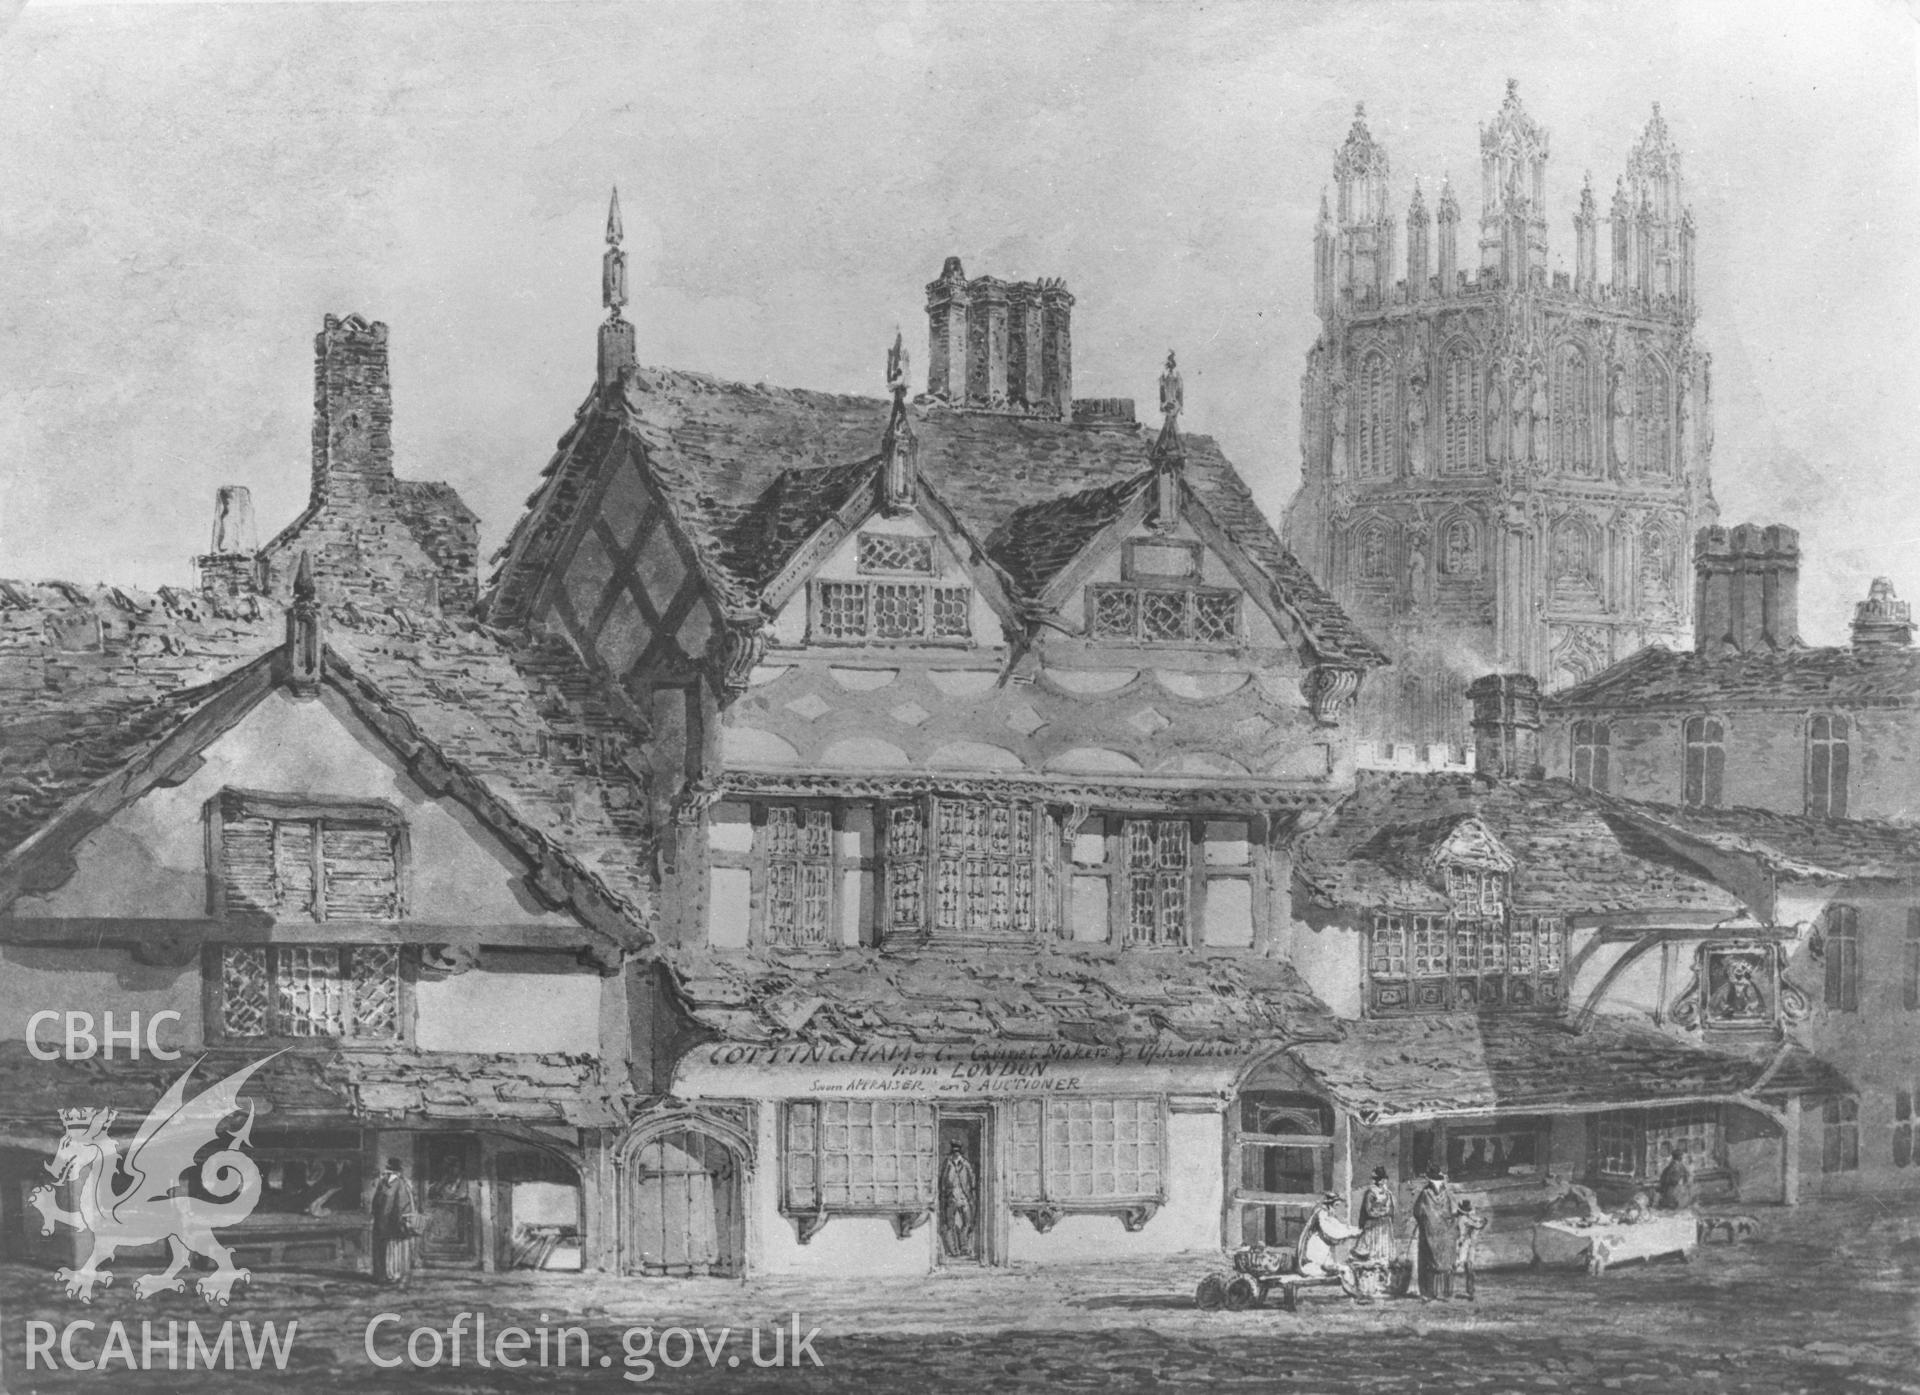 Black and white acetate negative showing ilustration of buildings in Wrexham.